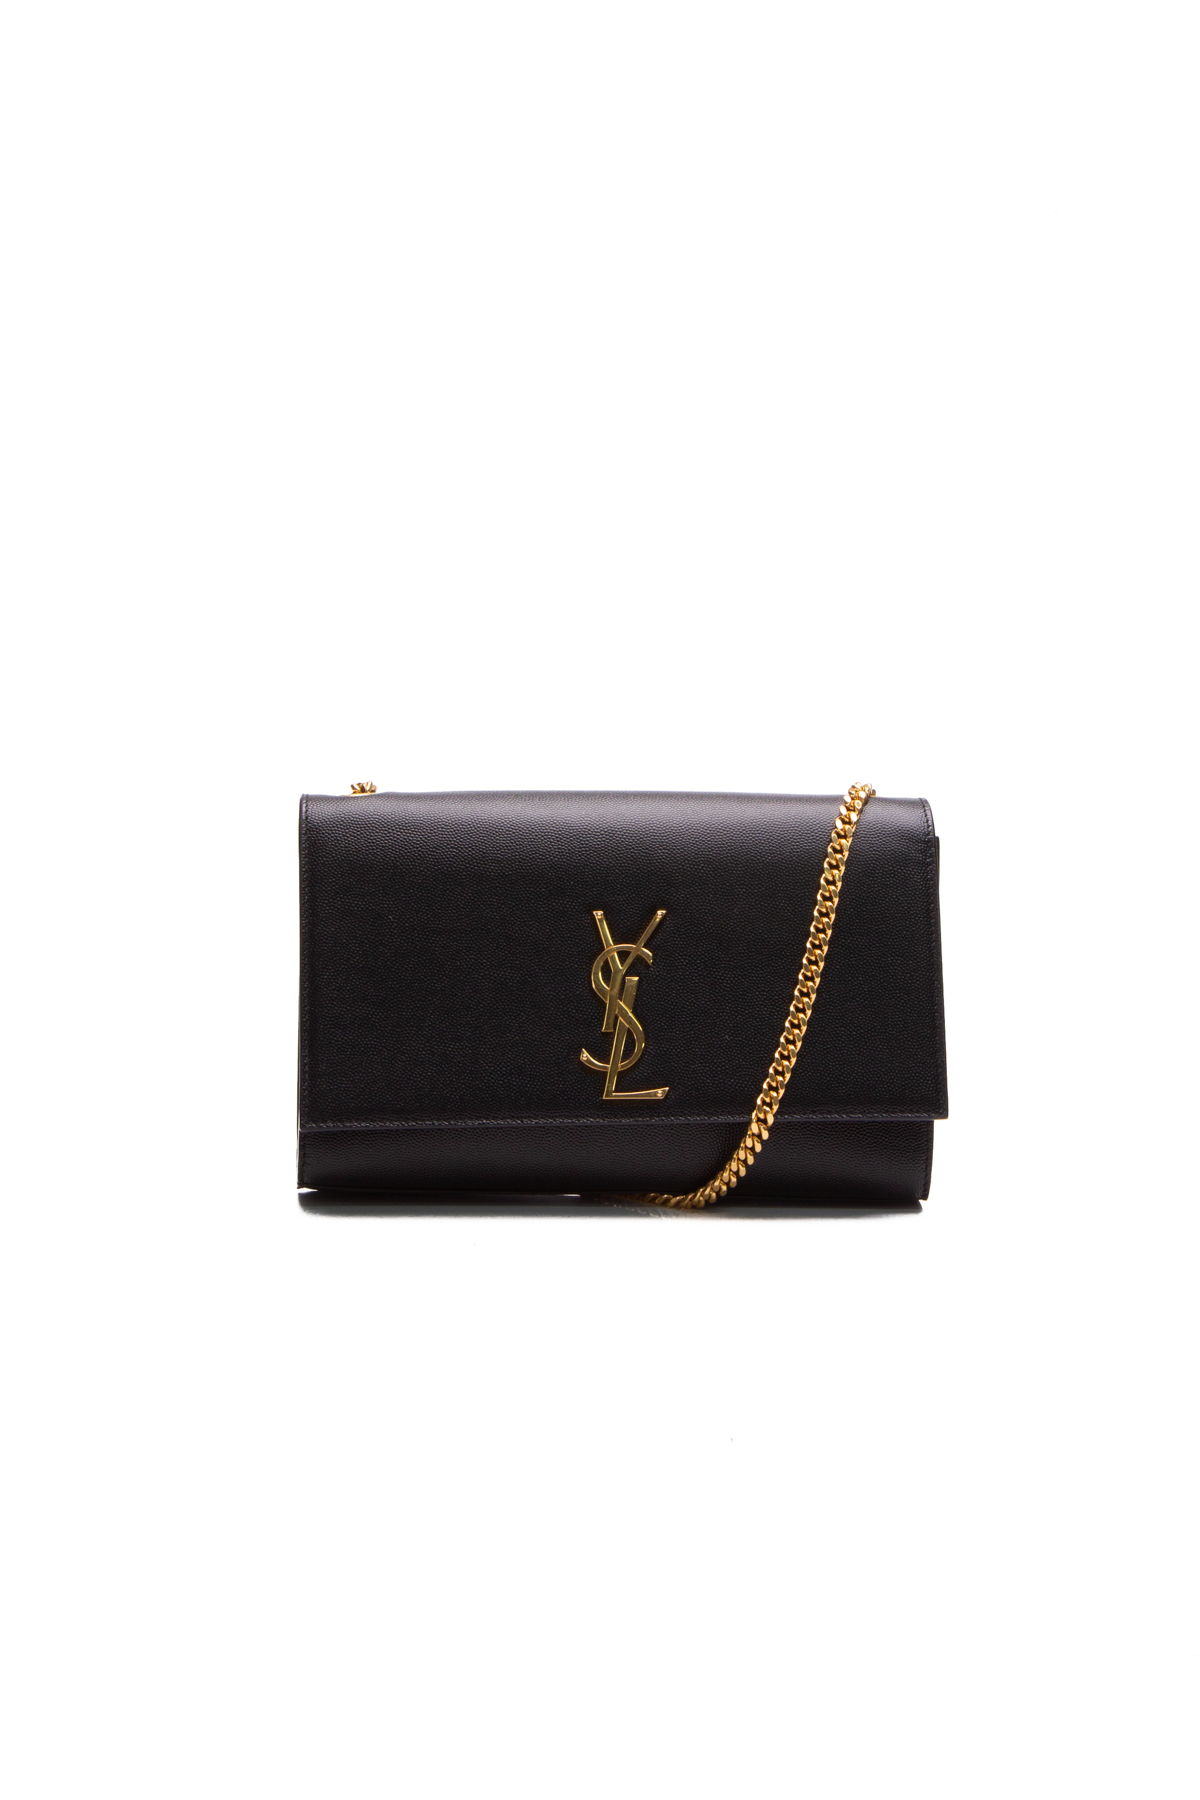 Saint Laurent Kate Pouch in Black Leather